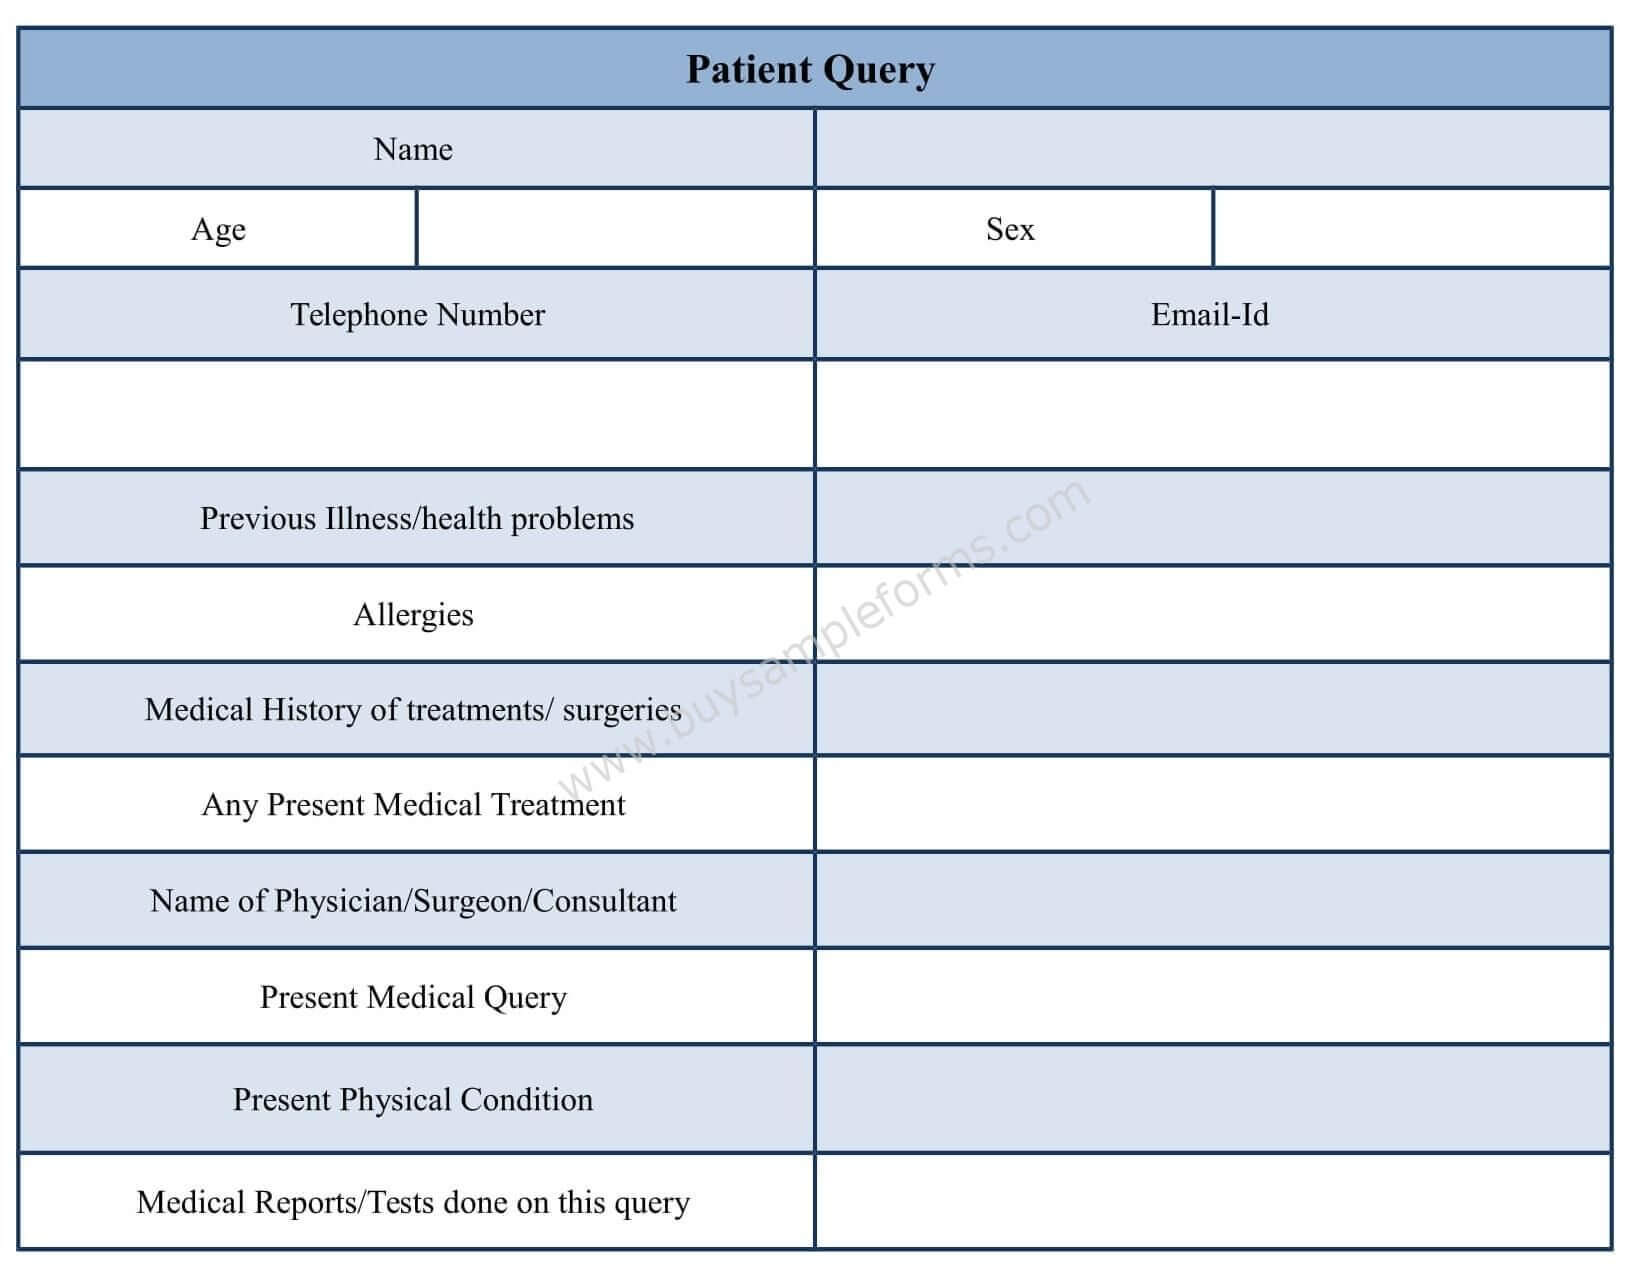 Patient Query Form Template In Word Format | Medical History Throughout Medical History Template Word